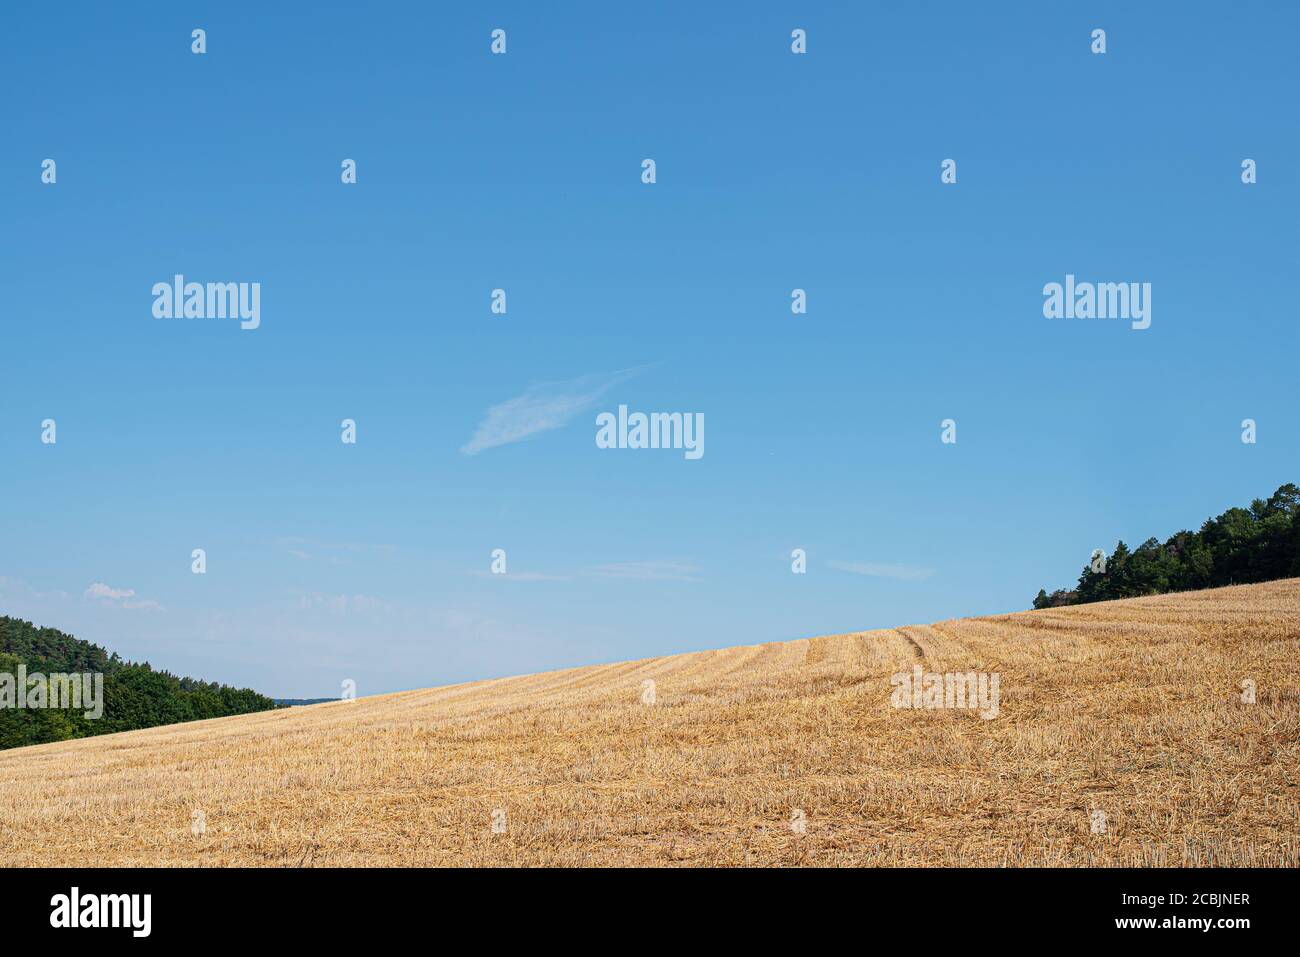 harvested wheatfield in hilly landscape against clear blue summer sky Stock Photo